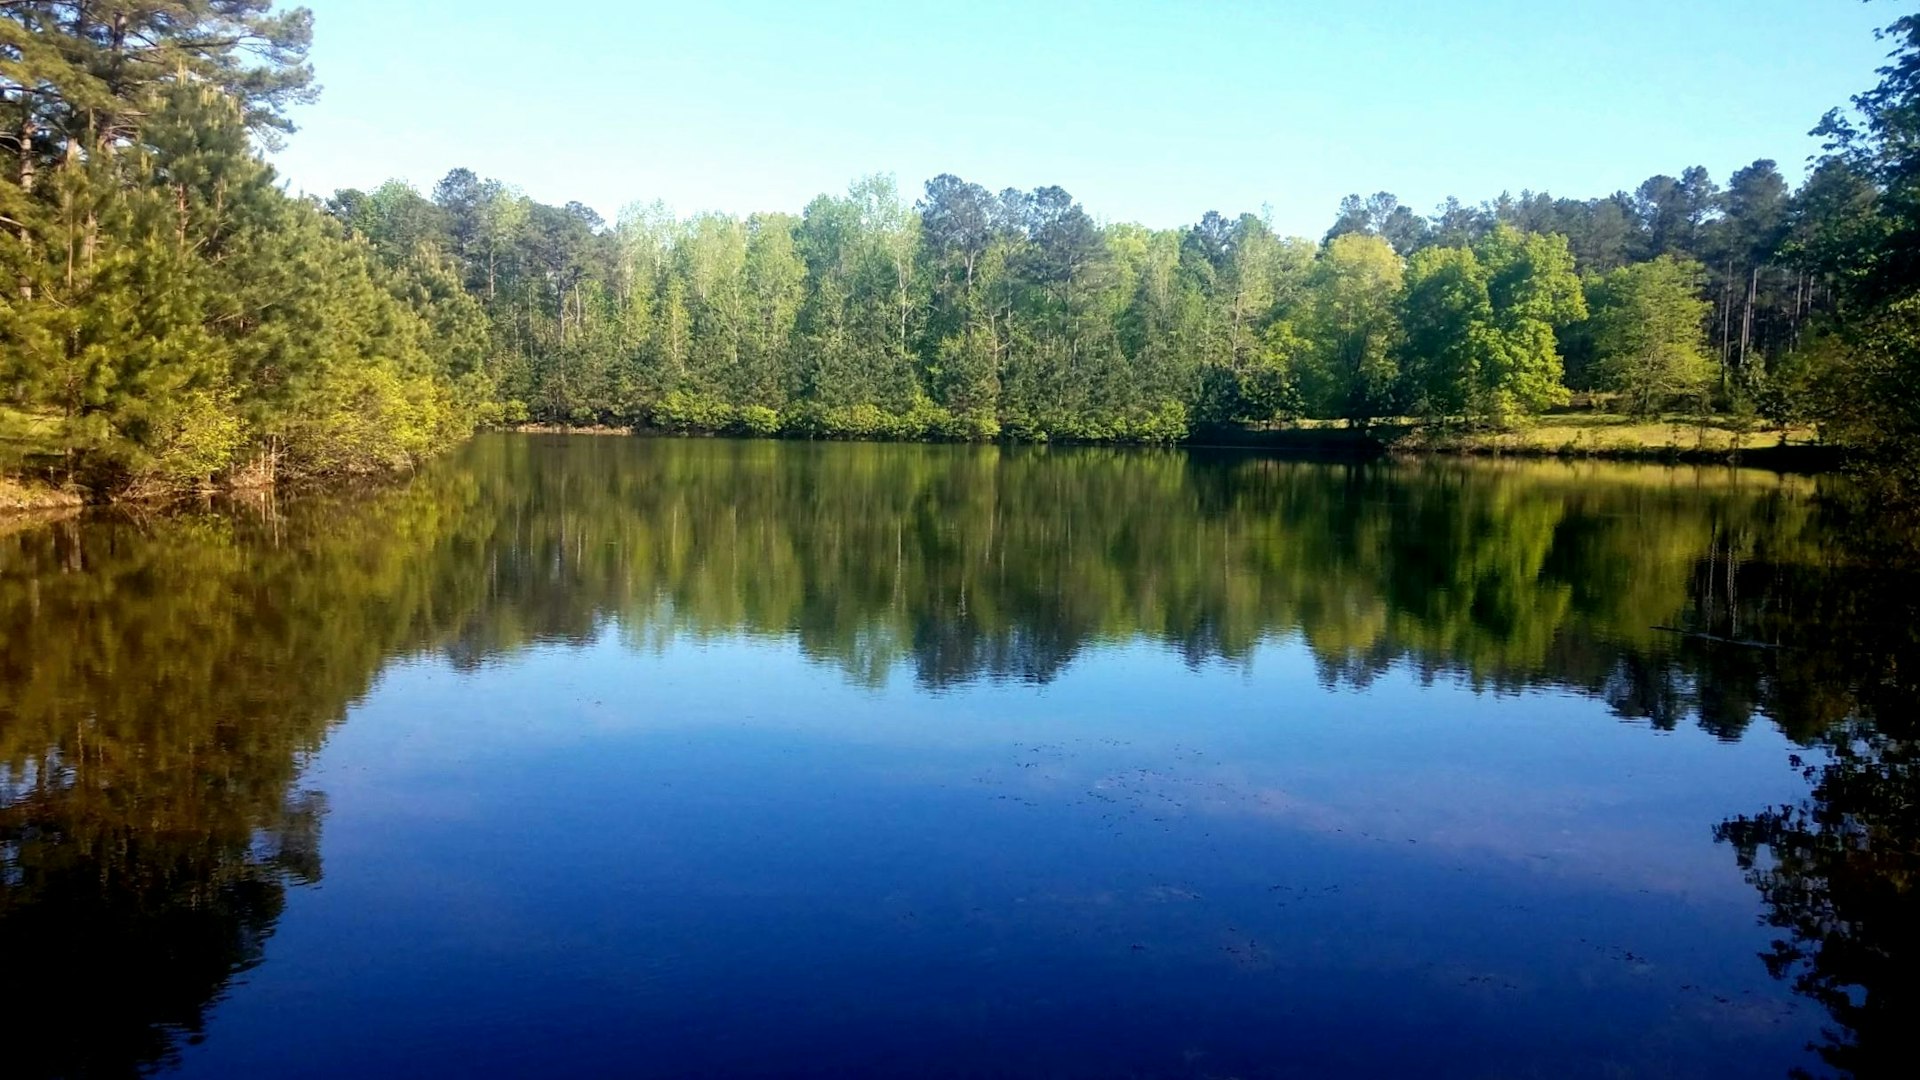 A lake surrounded by trees reflects the clear blue sky in Milledgeville, Georgia